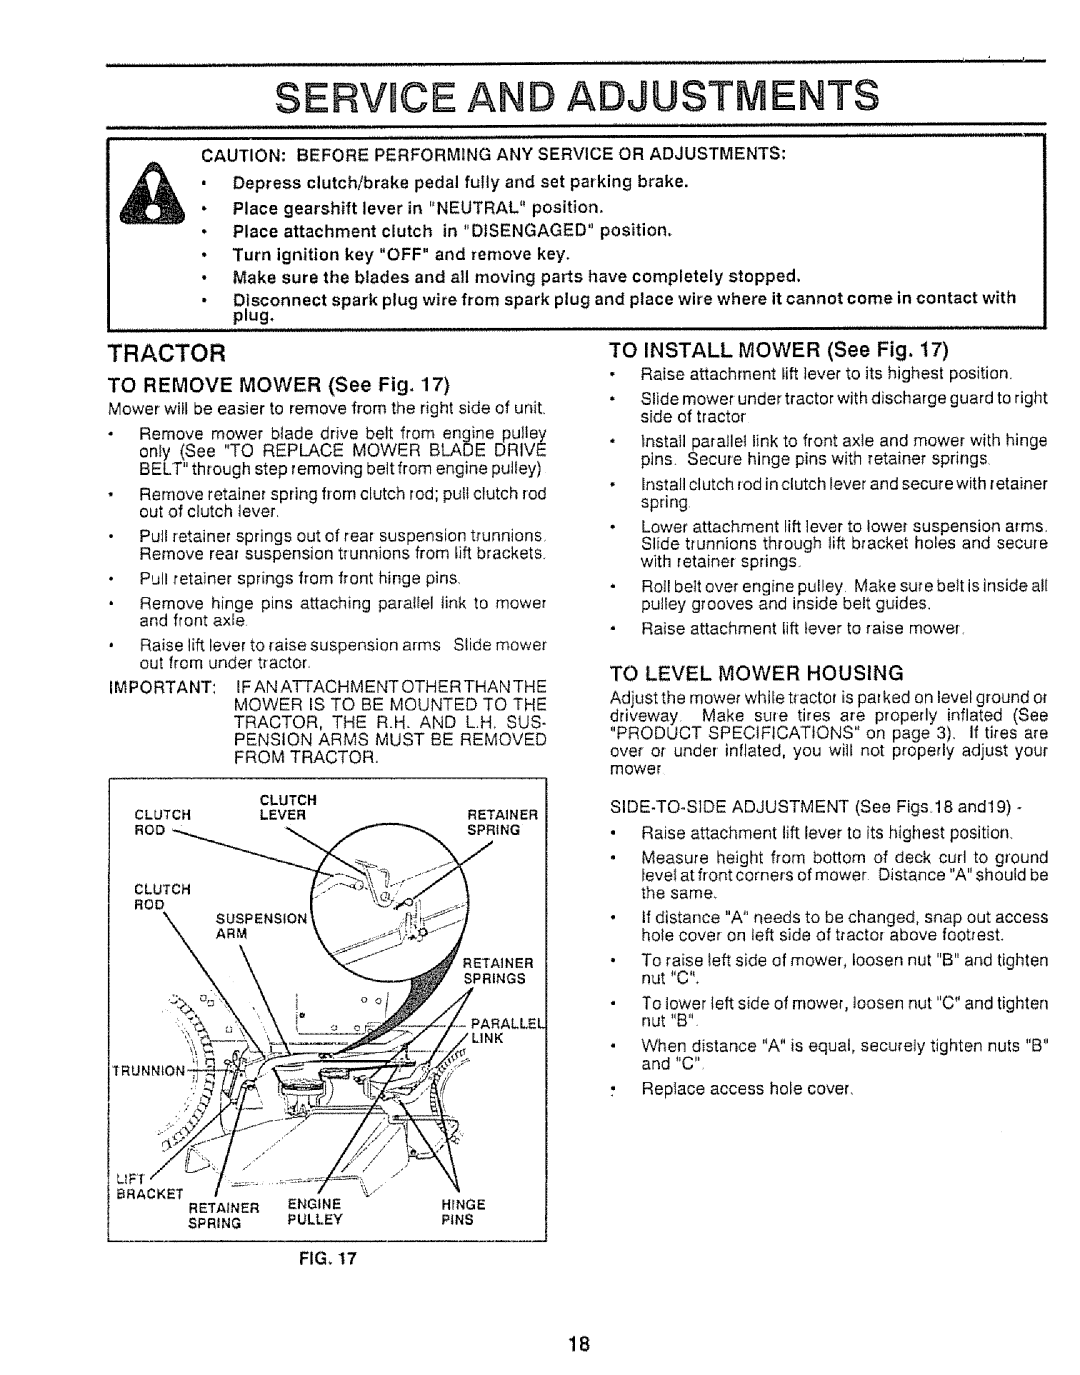 Craftsman 917.25552 manual Erv Ce A D Adjustments, Tractor, TO REMOVE MOWER See Fig, TO INSTALL MOWER See Fig 